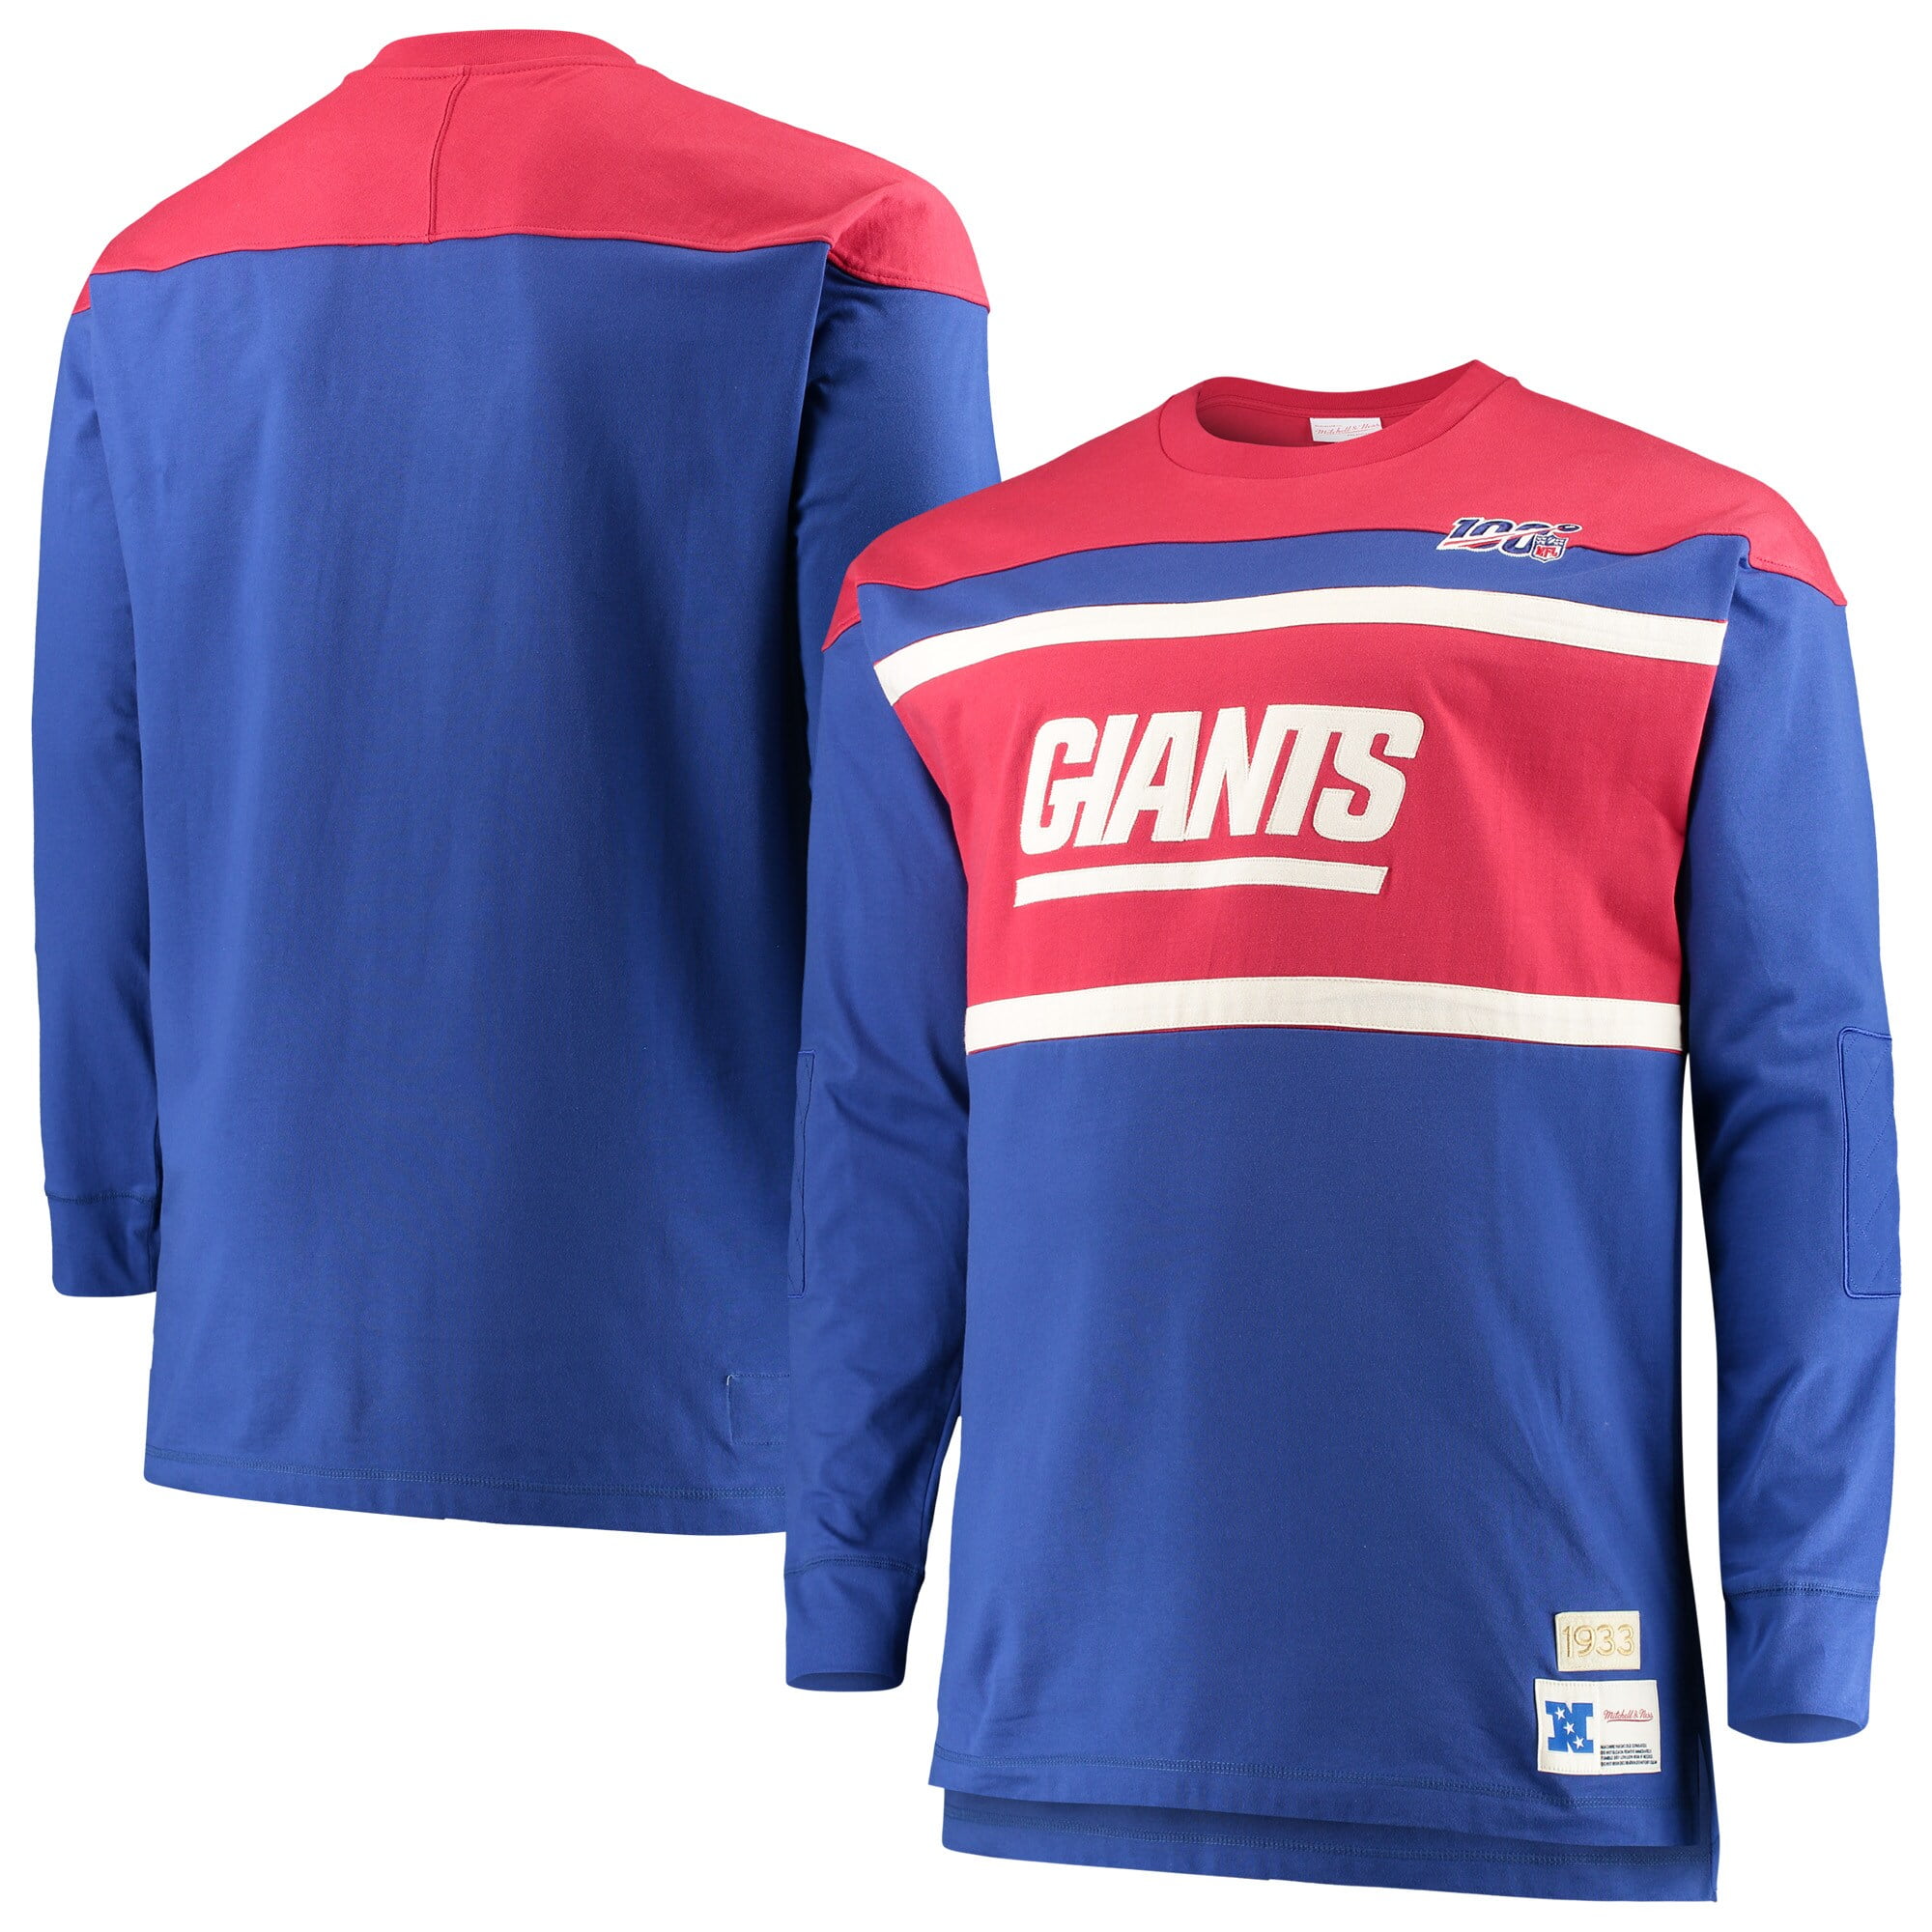 ny giants jersey big and tall